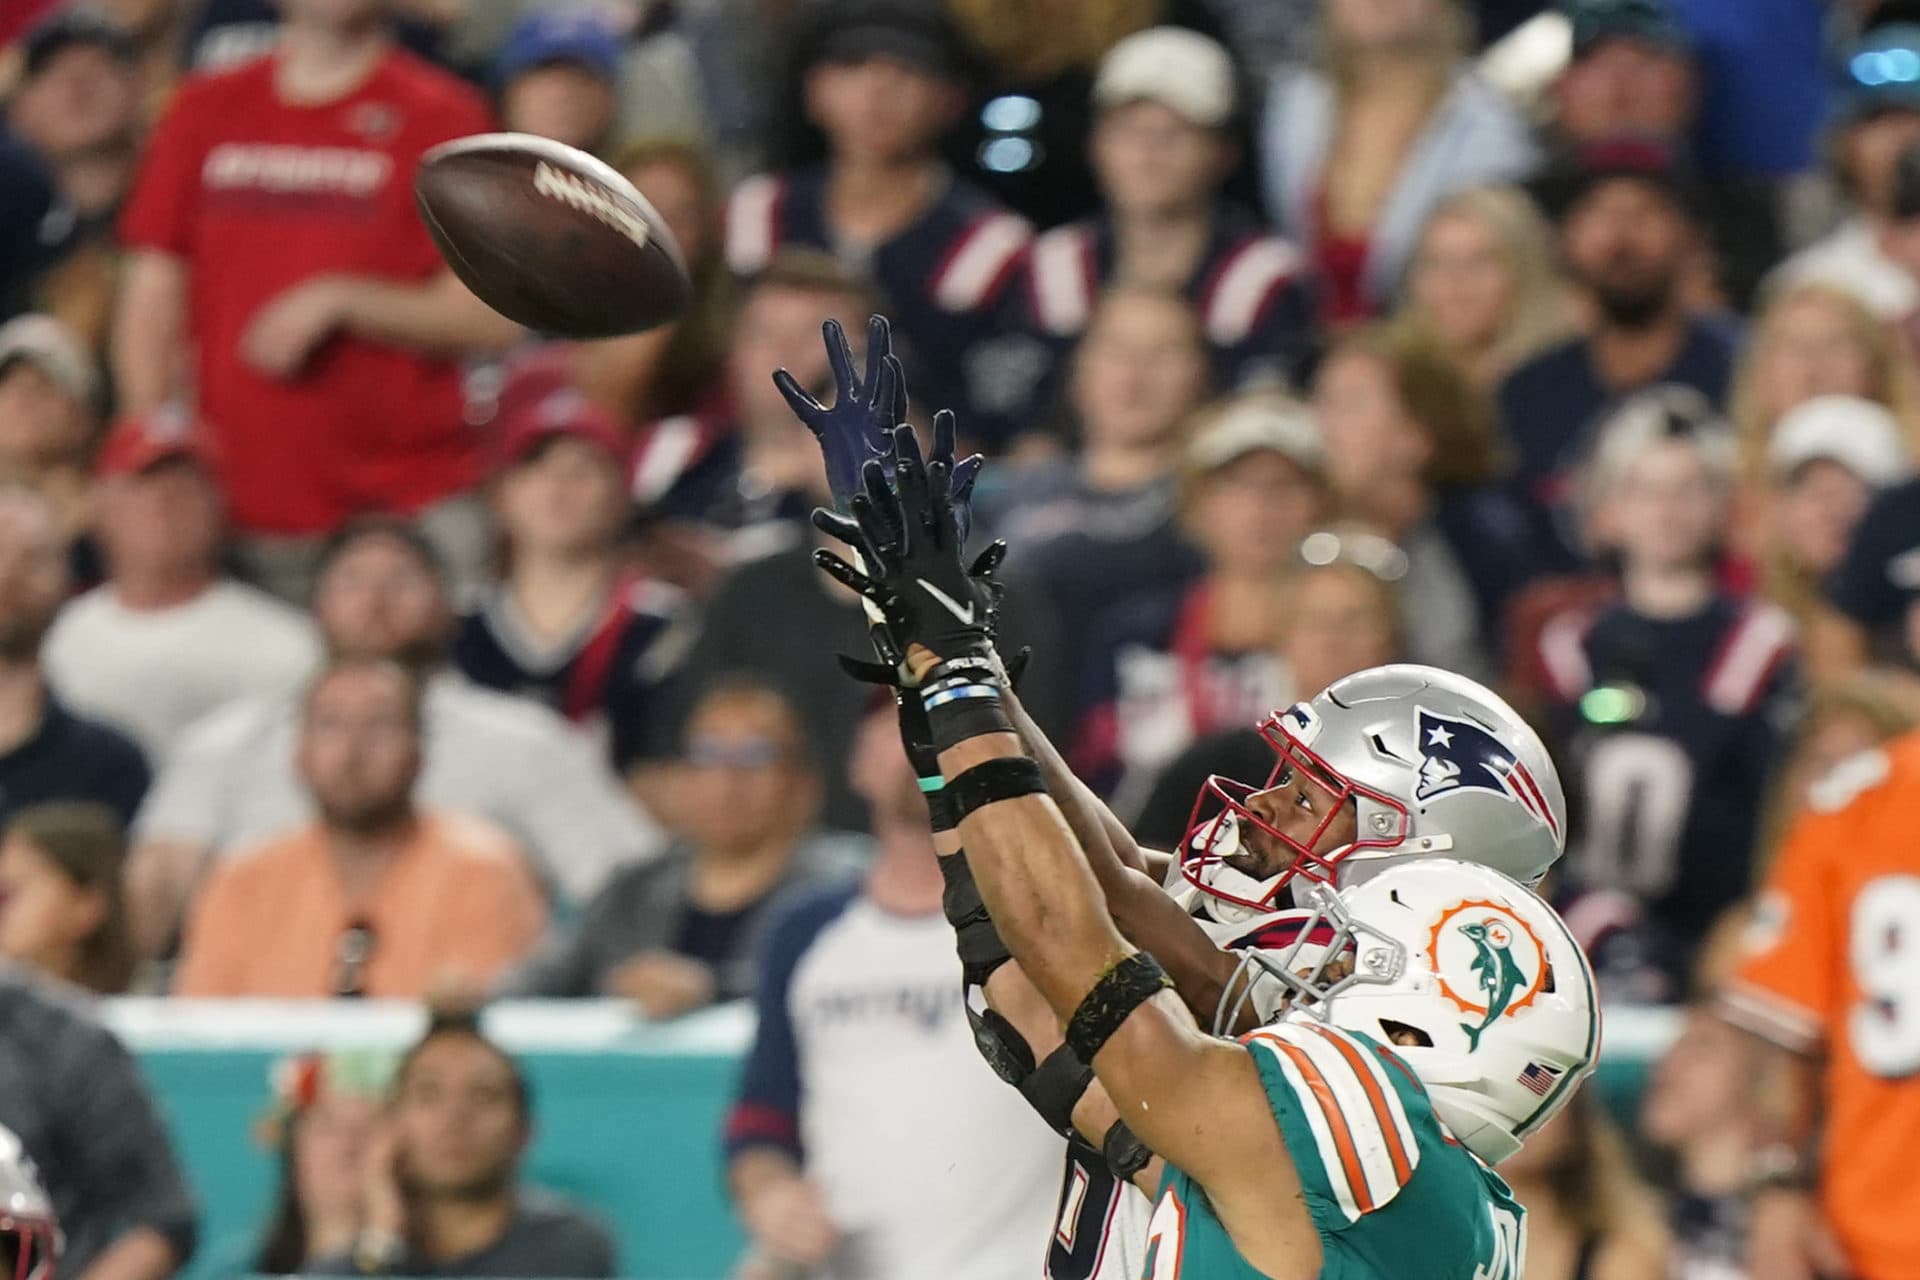 New England Patriots wide receiver Jakobi Meyers (16) makes a catch past the defense of Miami Dolphins safety Brandon Jones (29) during the second half of the game. (Wilfredo Lee/AP)